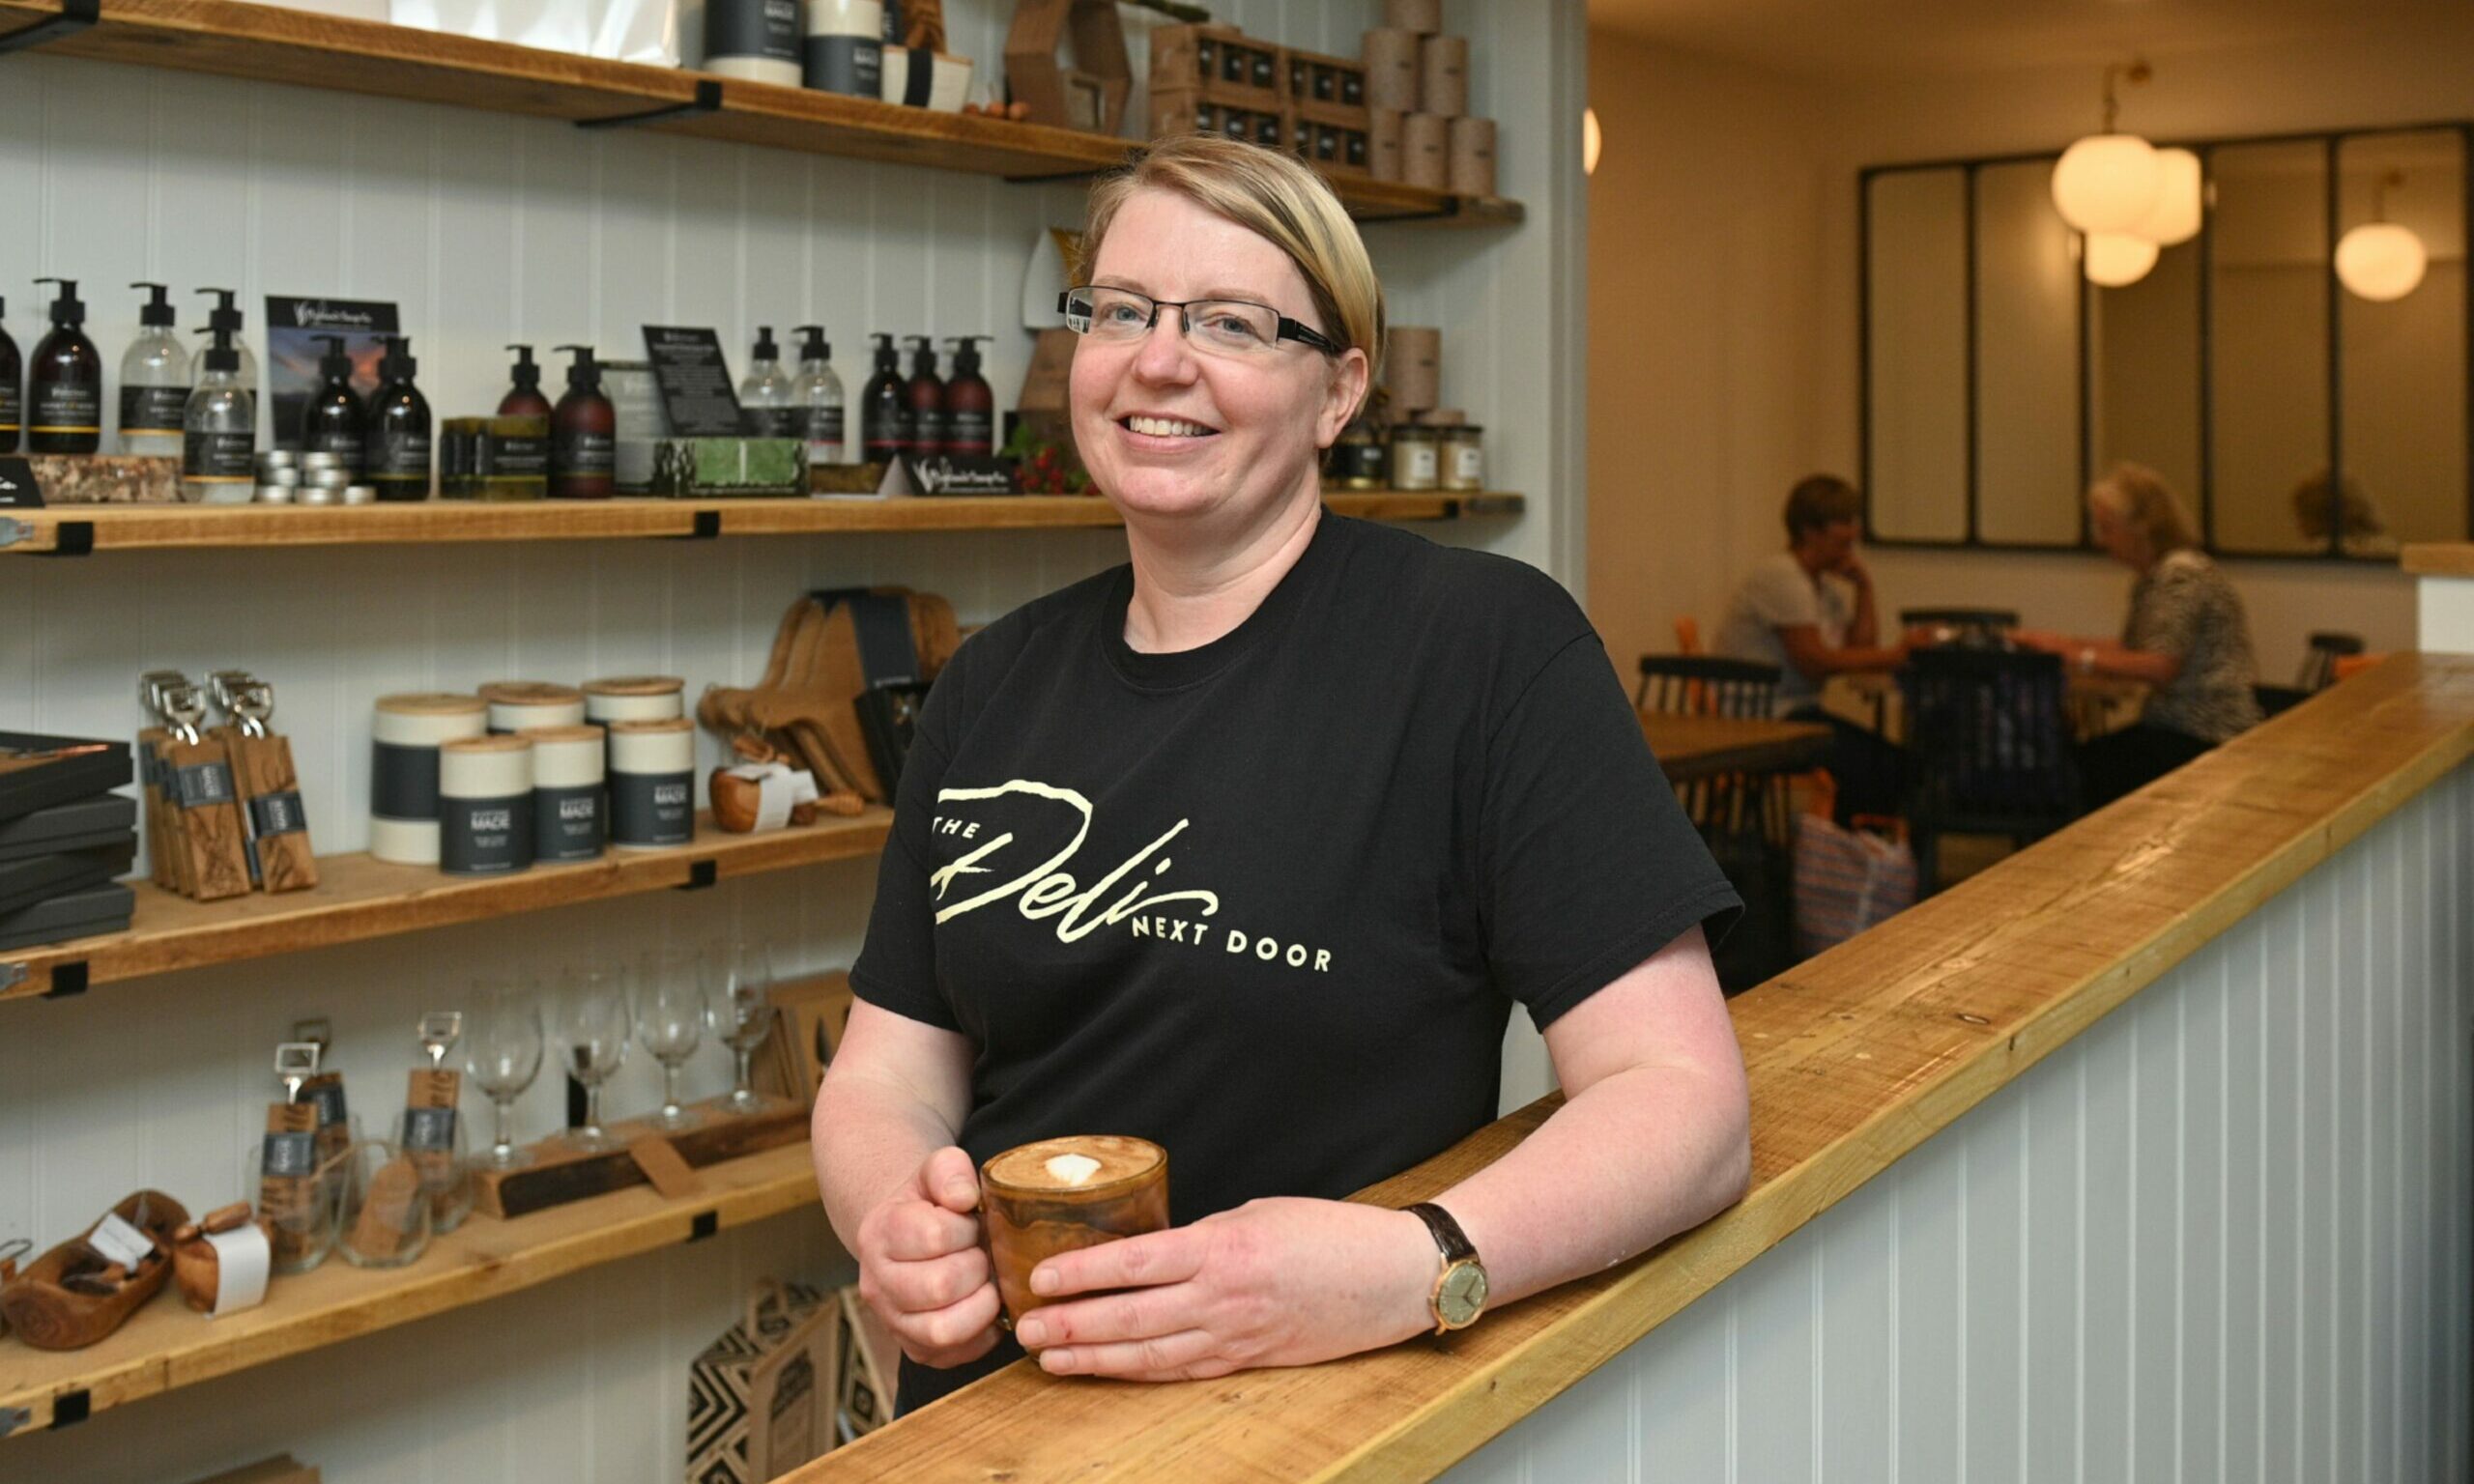 Faith Houlding has opened the Deli Next Door to help support Elgin town centre's Covid recovery.